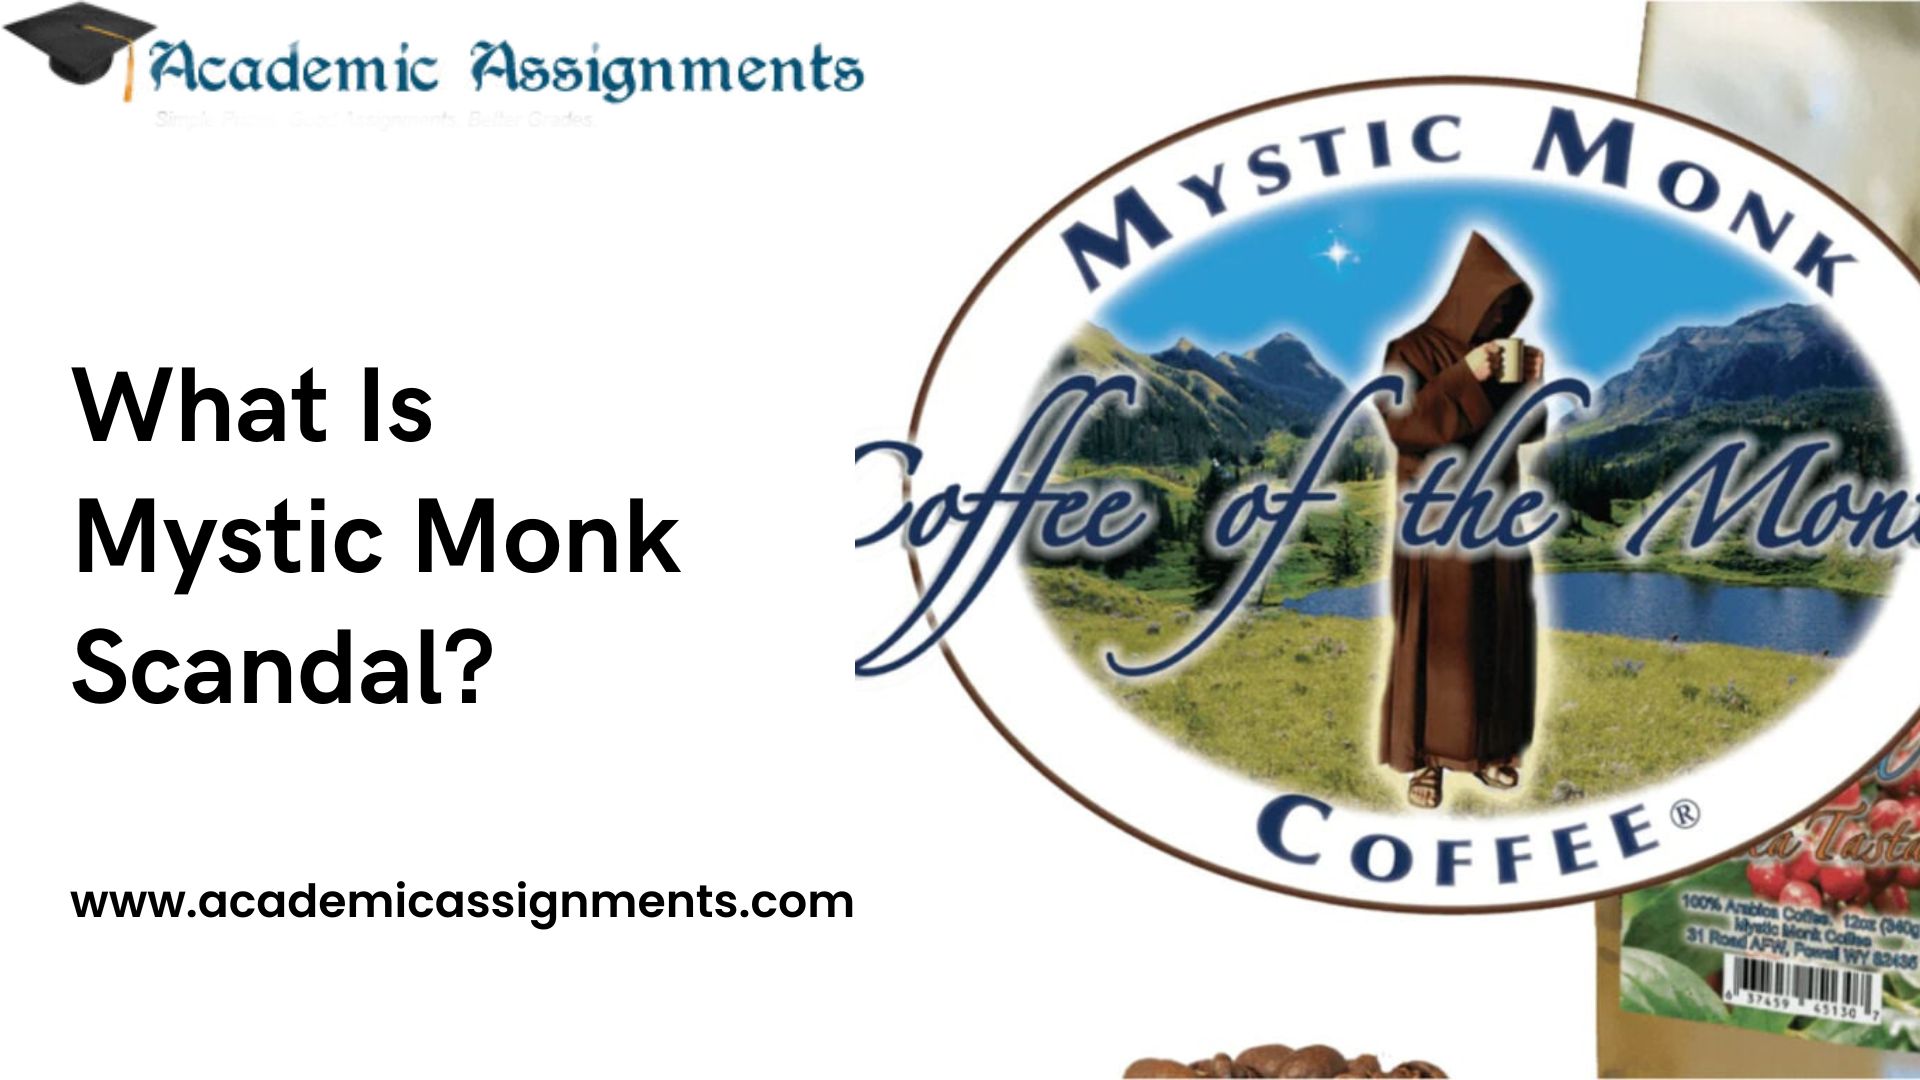 What Is Mystic Monk Scandal